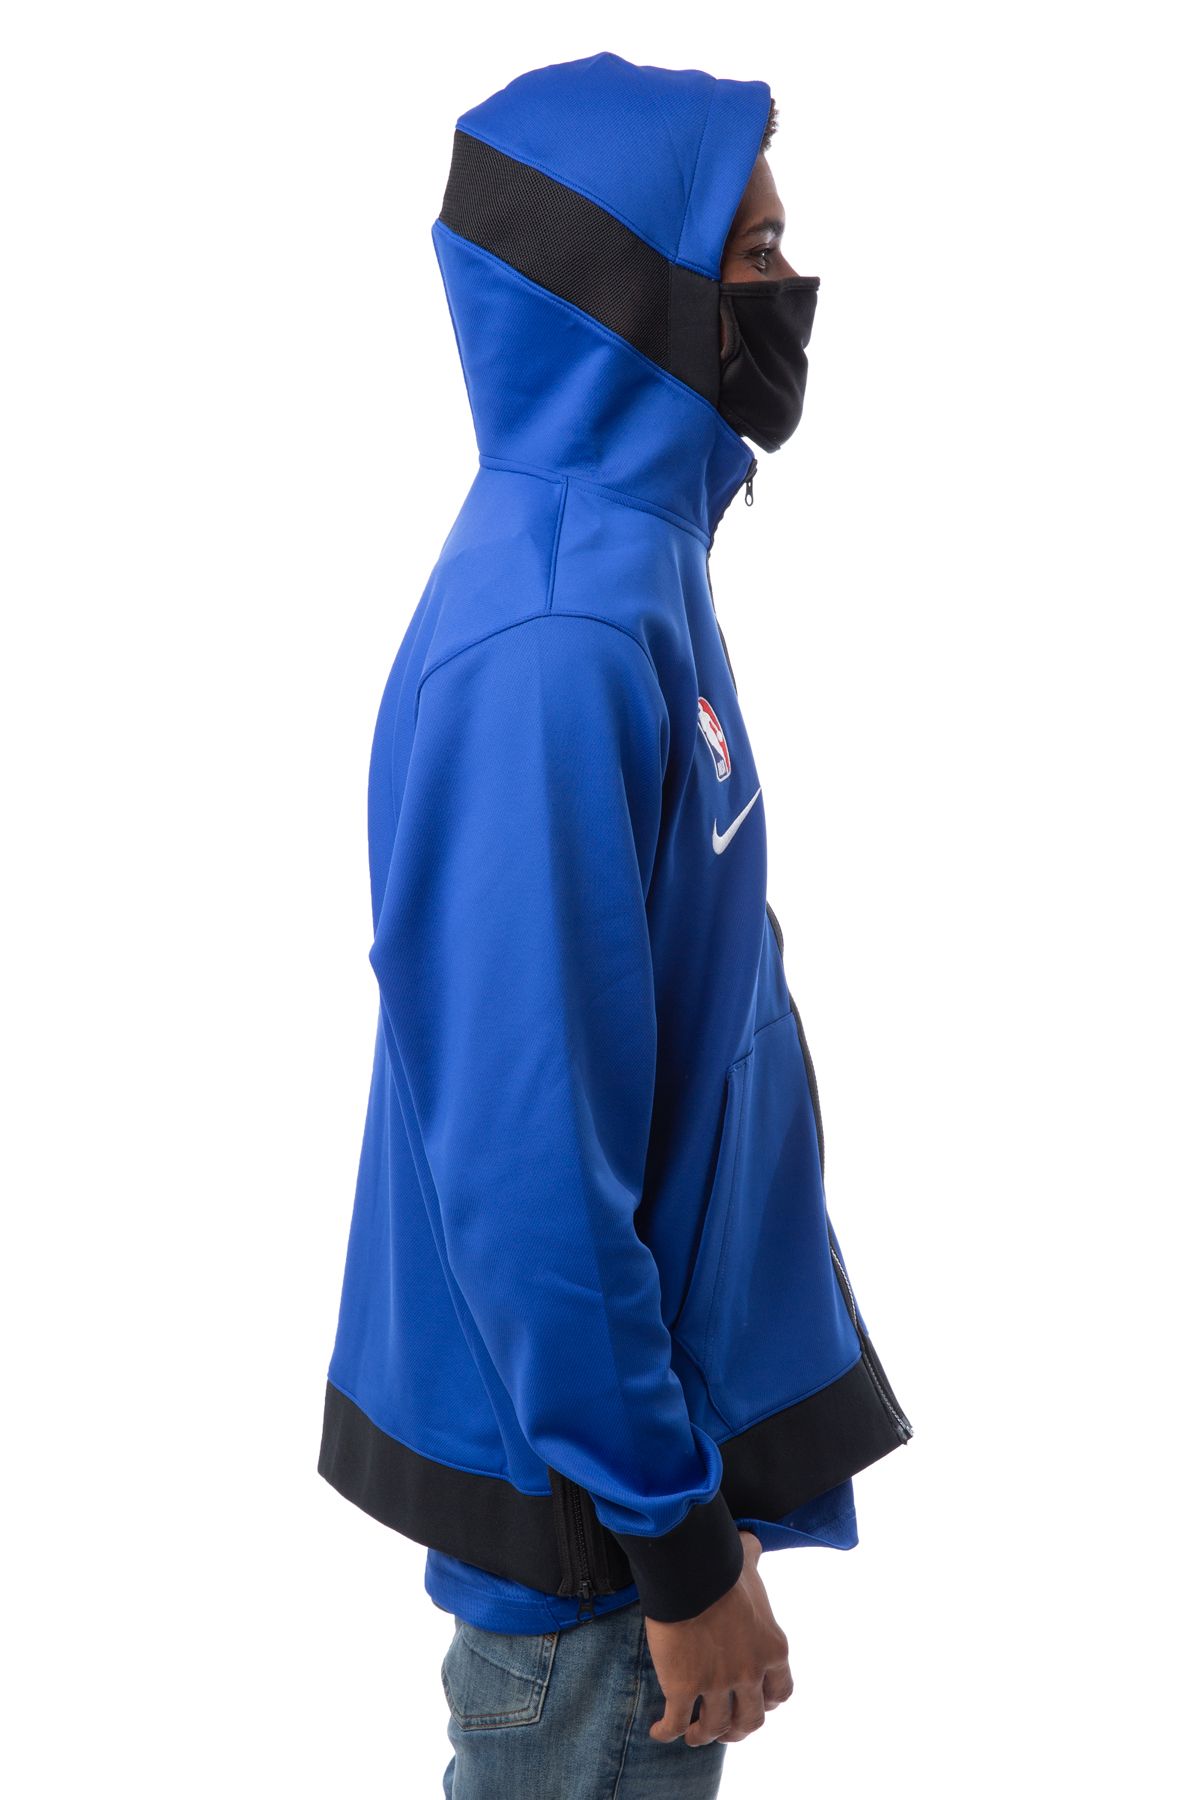 Nike Youth Los Angeles Clippers Showtime Full Zip Hoodie - Blue - L - L (Large)